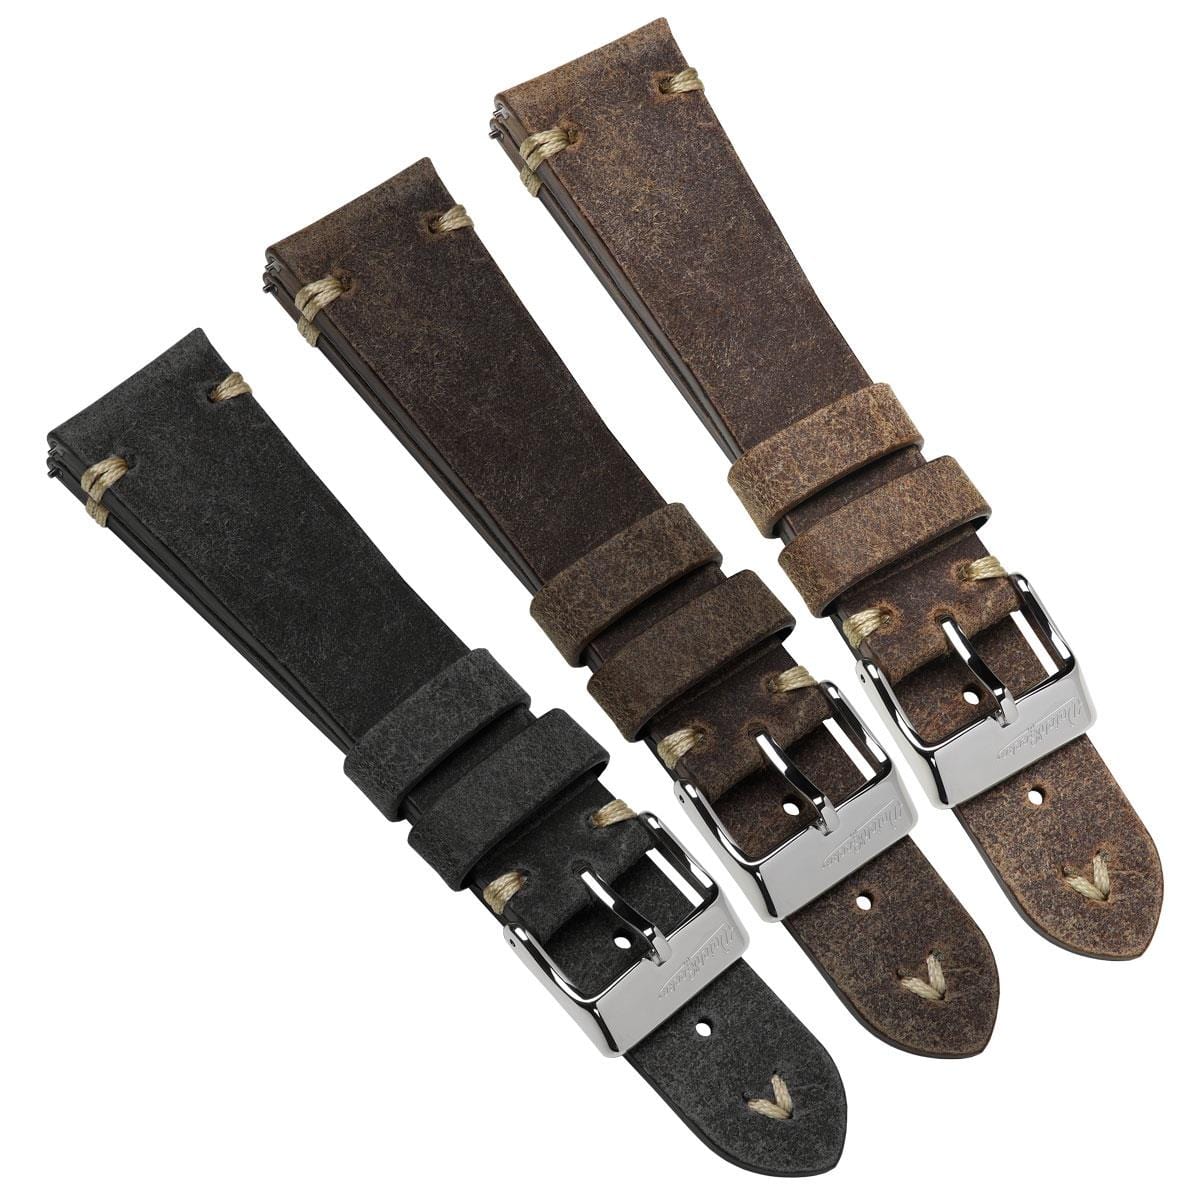 2.5 watch strap knife mold leather